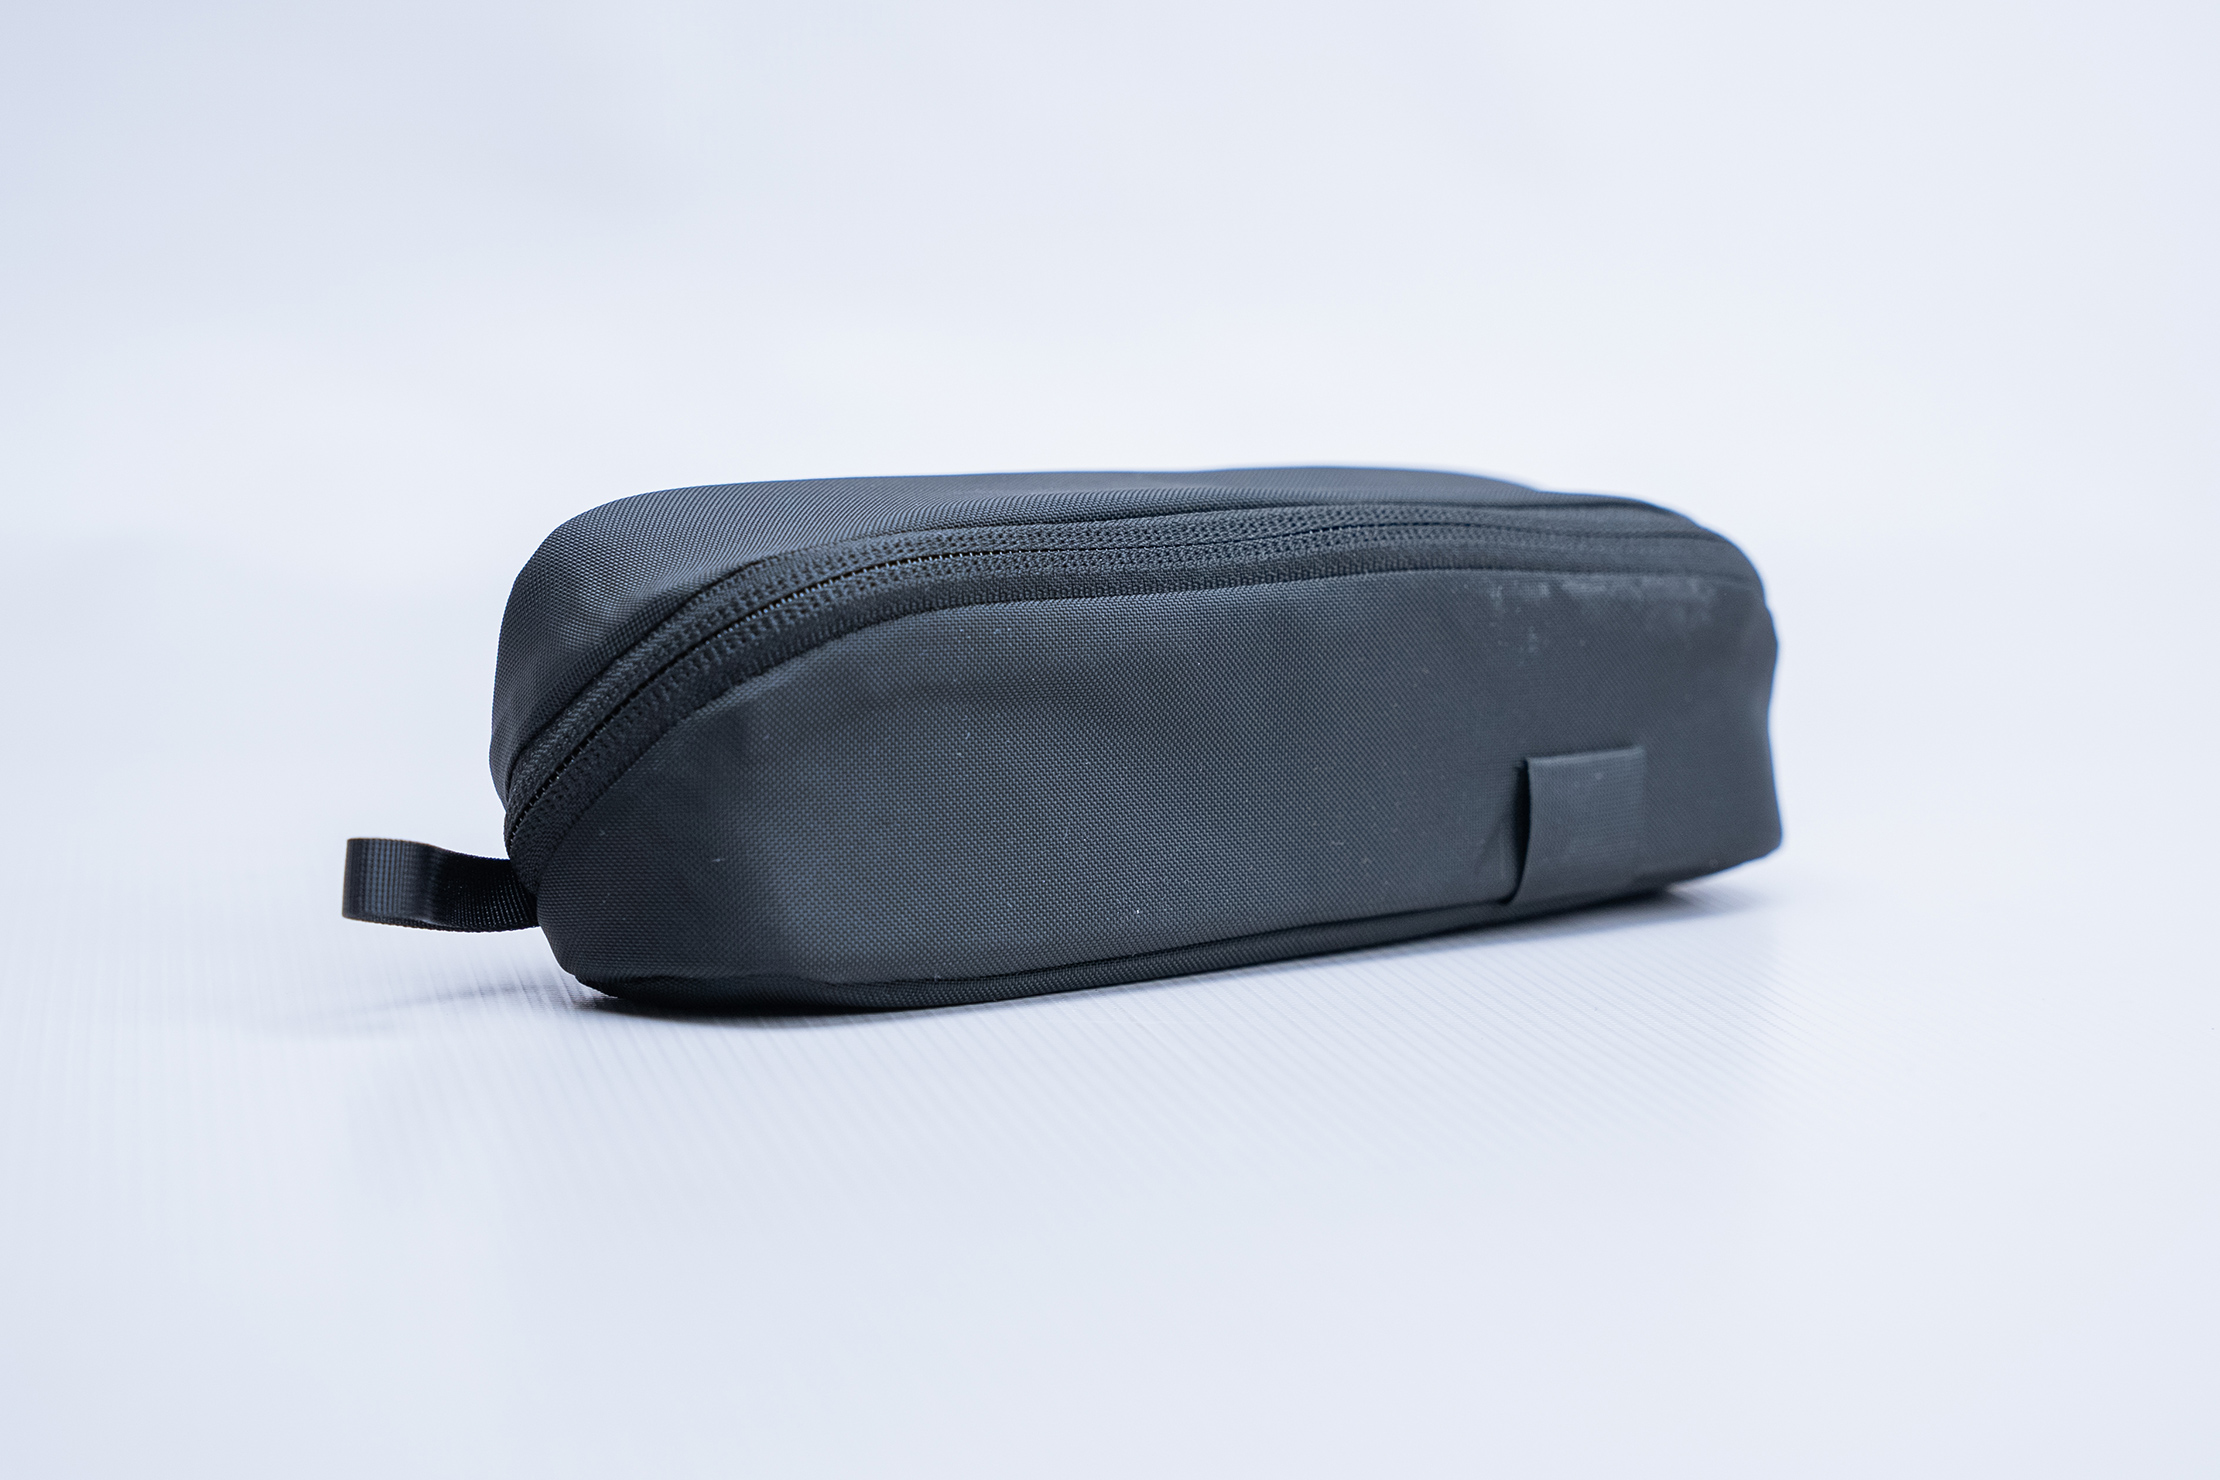 EVERGOODS Civic Access Pouch 0.5L Full